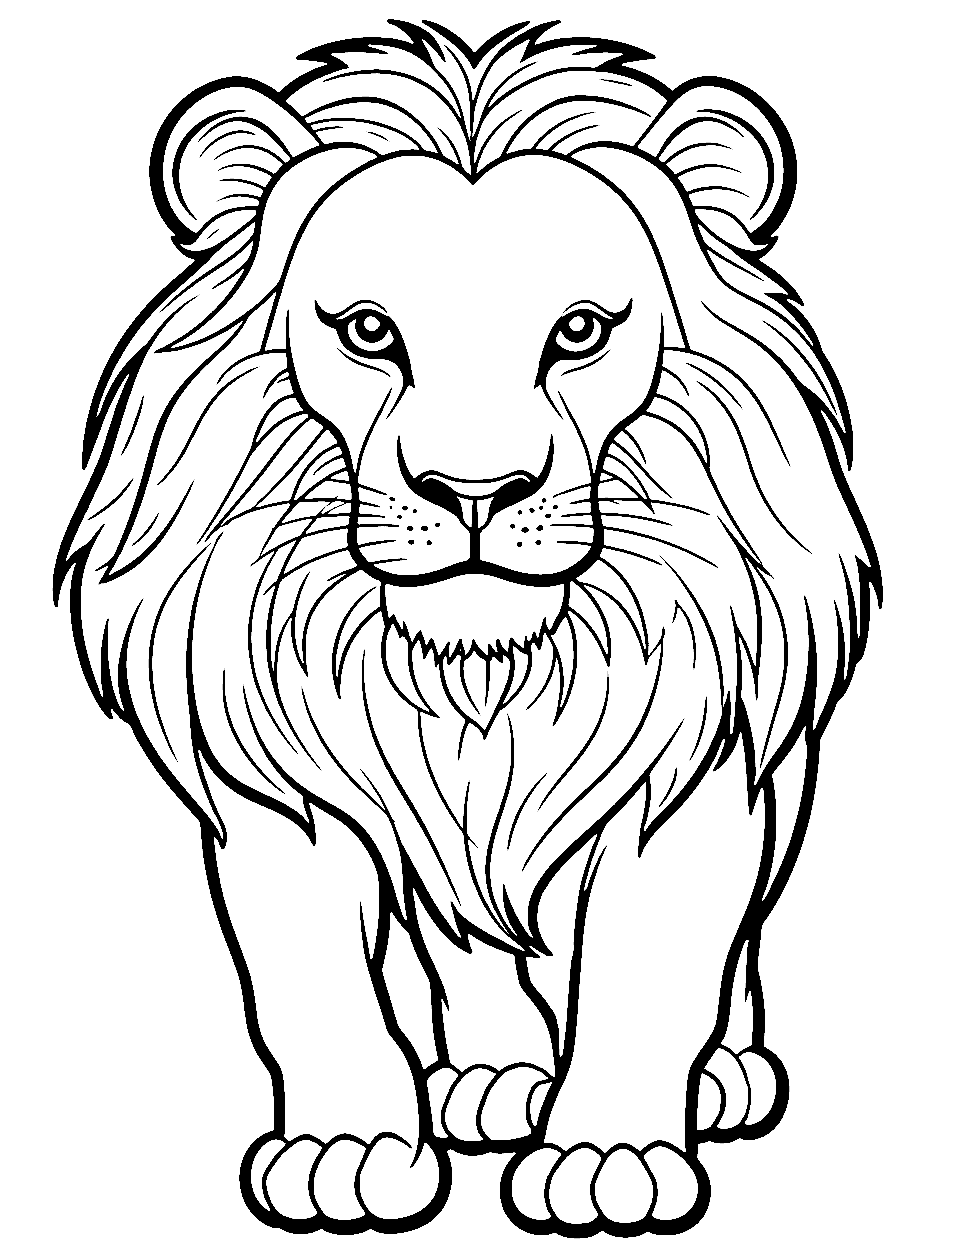 Lion Face Close-Up Coloring Page - Detailed features of a lion’s face, emphasizing the eyes.